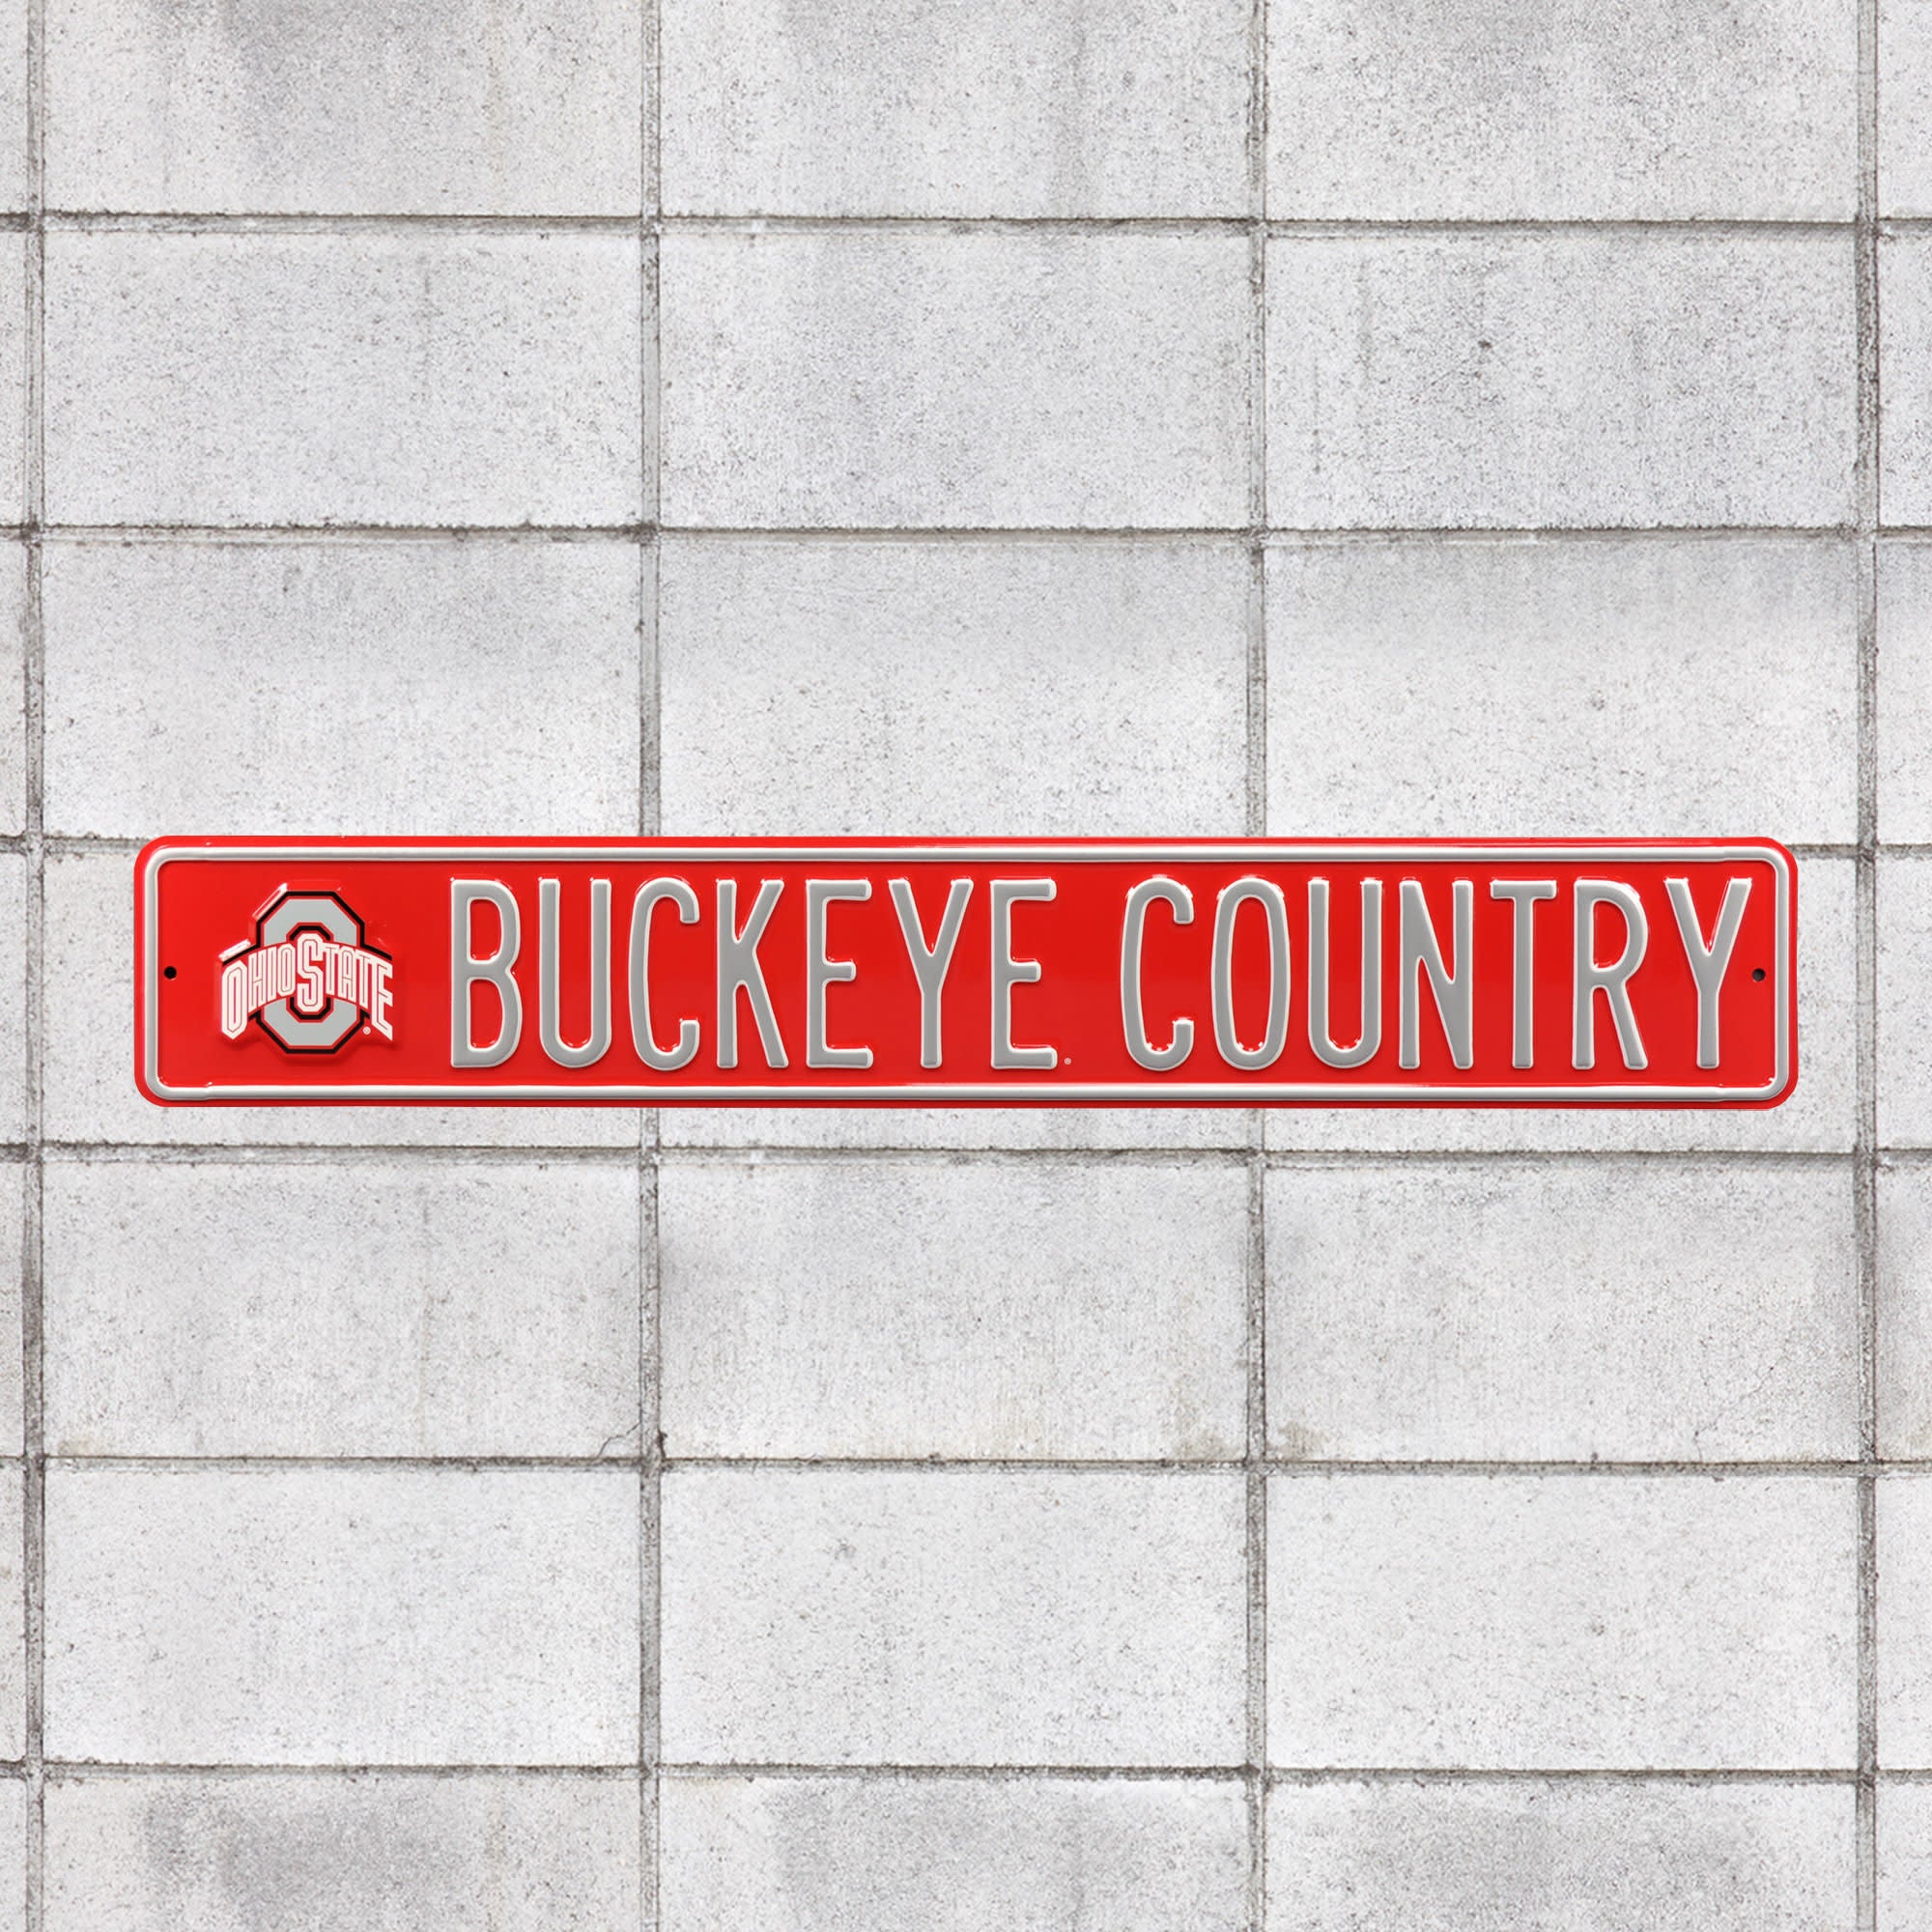 Ohio State Buckeyes: Buckeye Country - Officially Licensed Metal Street Sign 36.0"W x 6.0"H by Fathead | 100% Steel